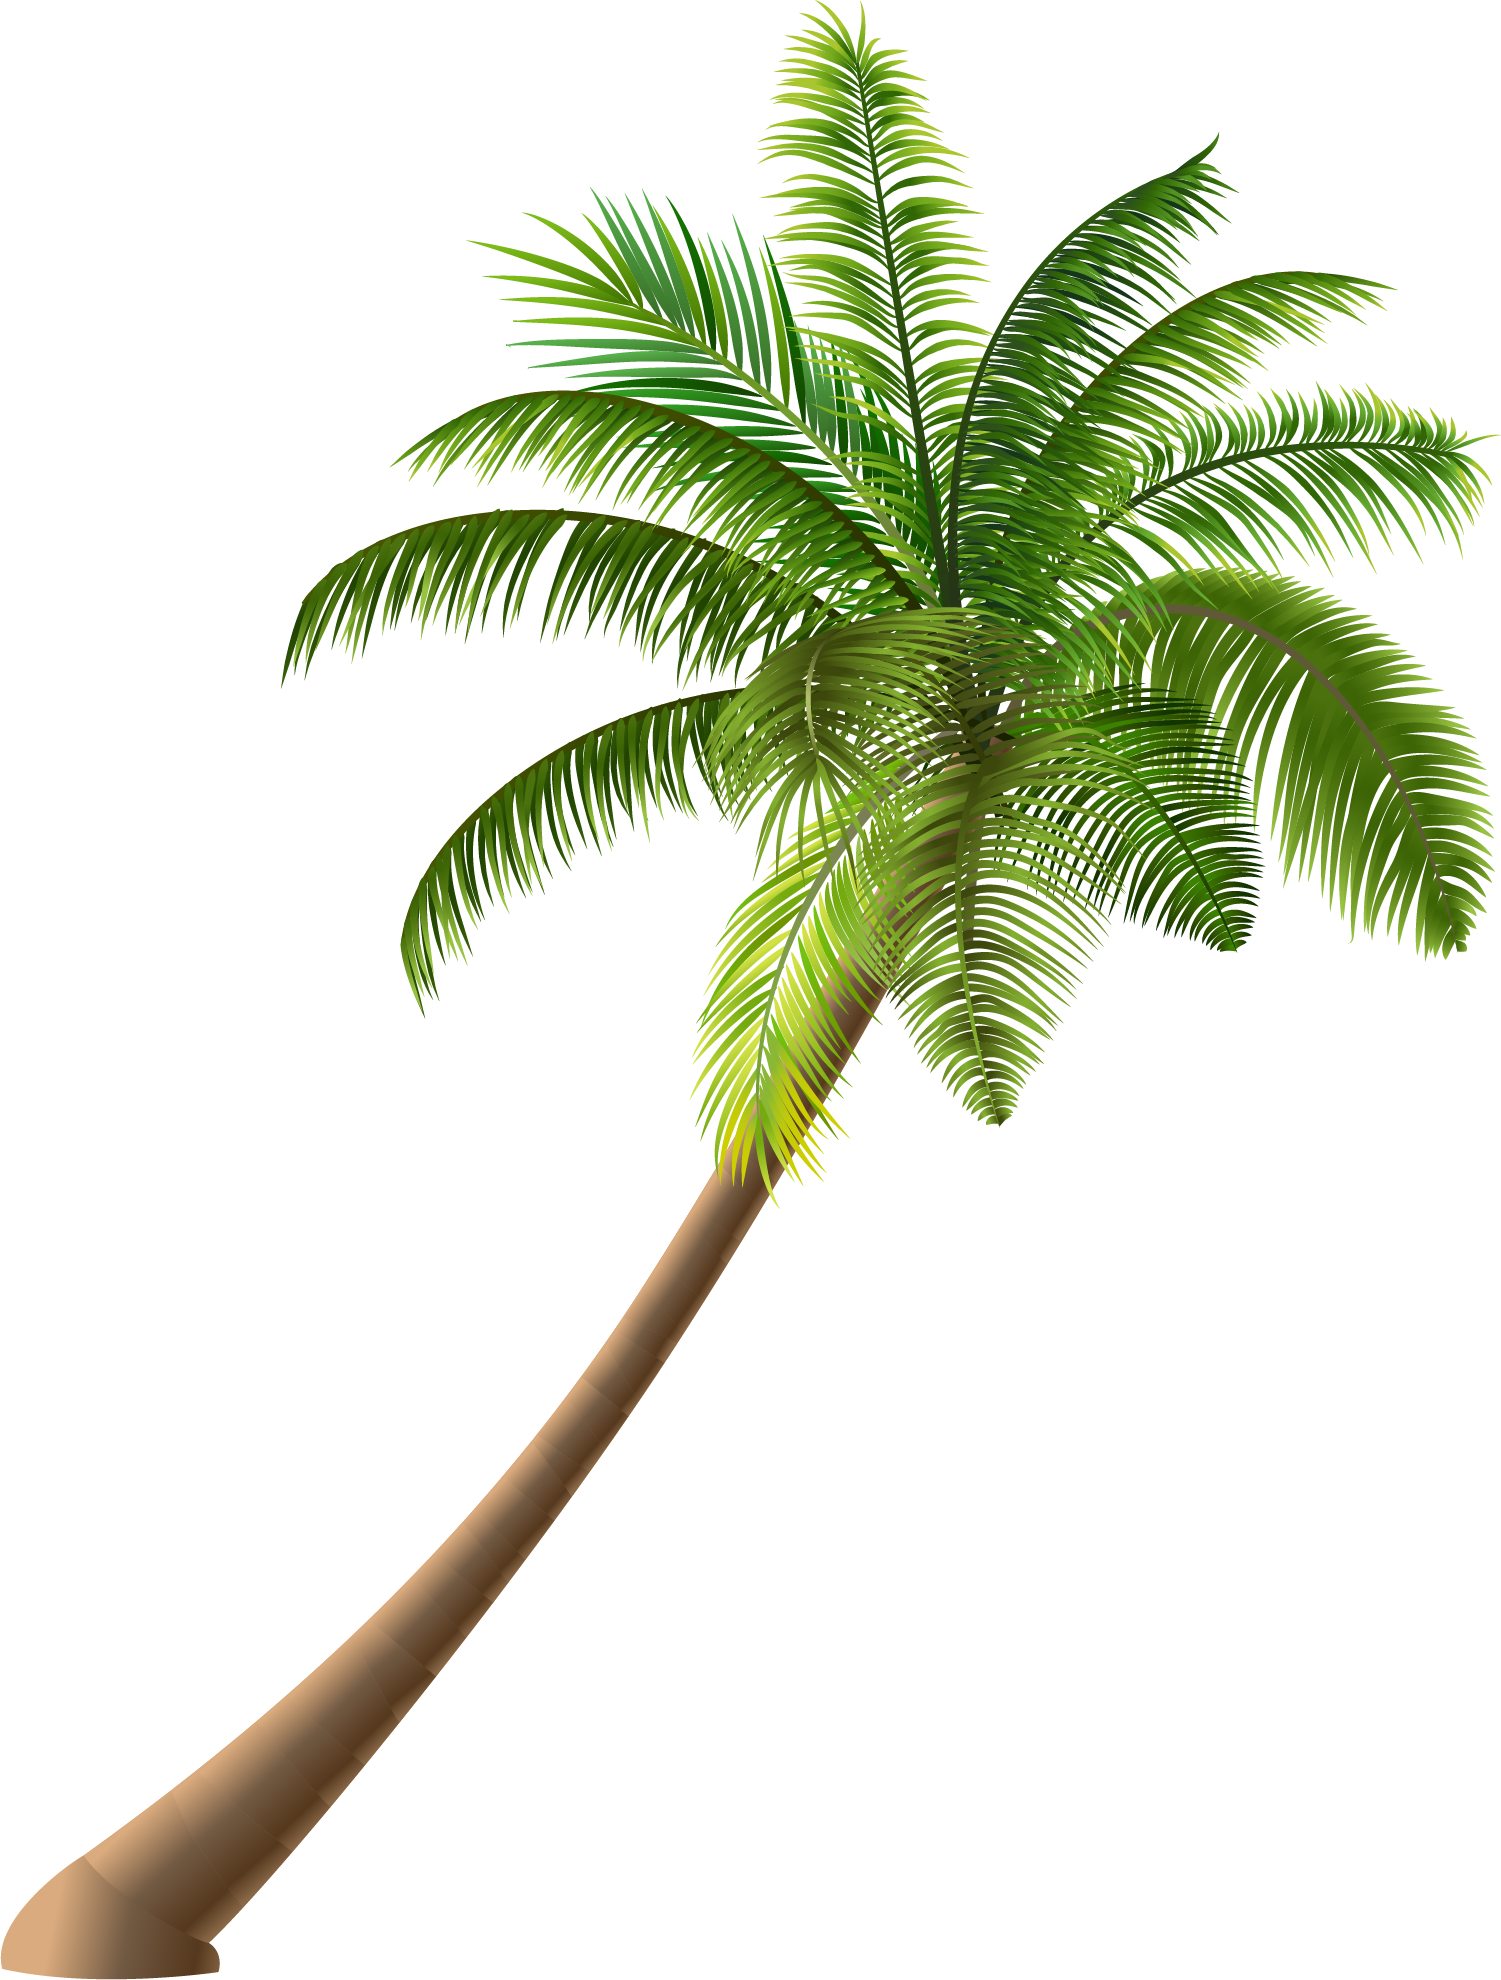 Download Summer Coconut Simple Illustration Royalty-Free Green Trees ...